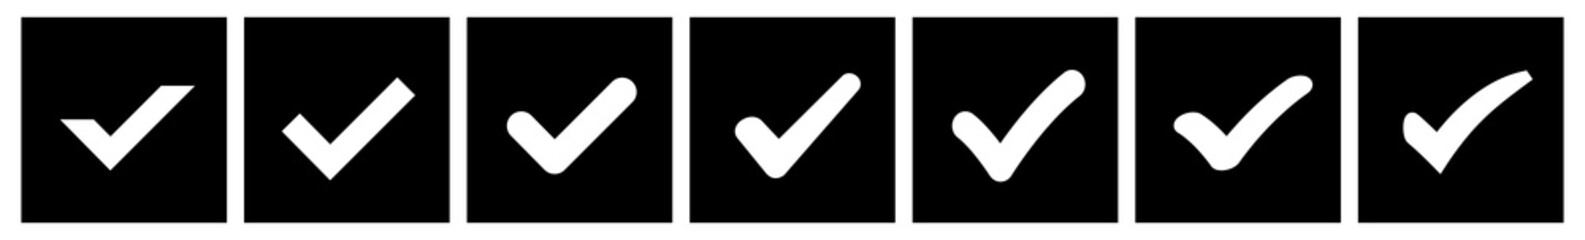 Check Mark Checkbox Square Icon Black | Checkmark Illustration | Tick Symbol | Voting Logo | Approved Sign | Isolated | Variations